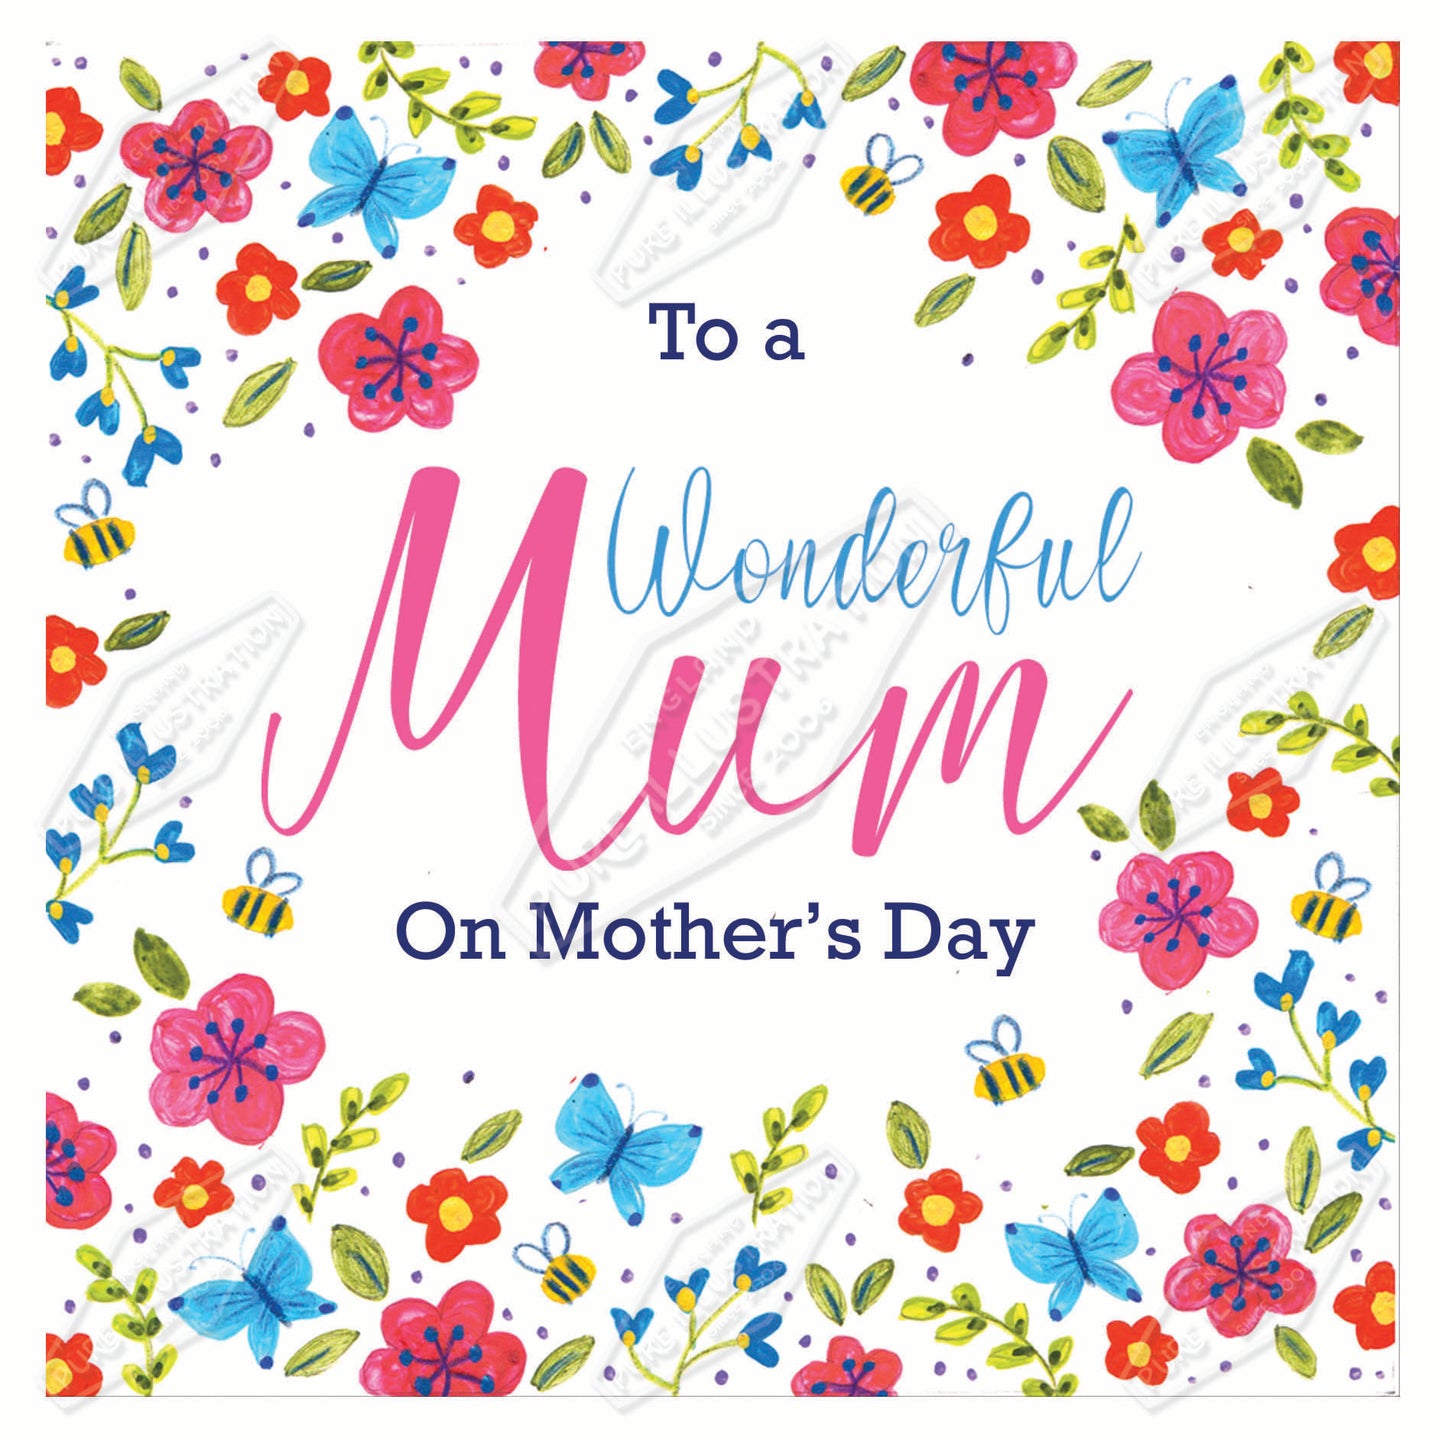 00035752AMA - Ally Marie is represented by Pure Art Licensing Agency - Mother's Day Greeting Card Design